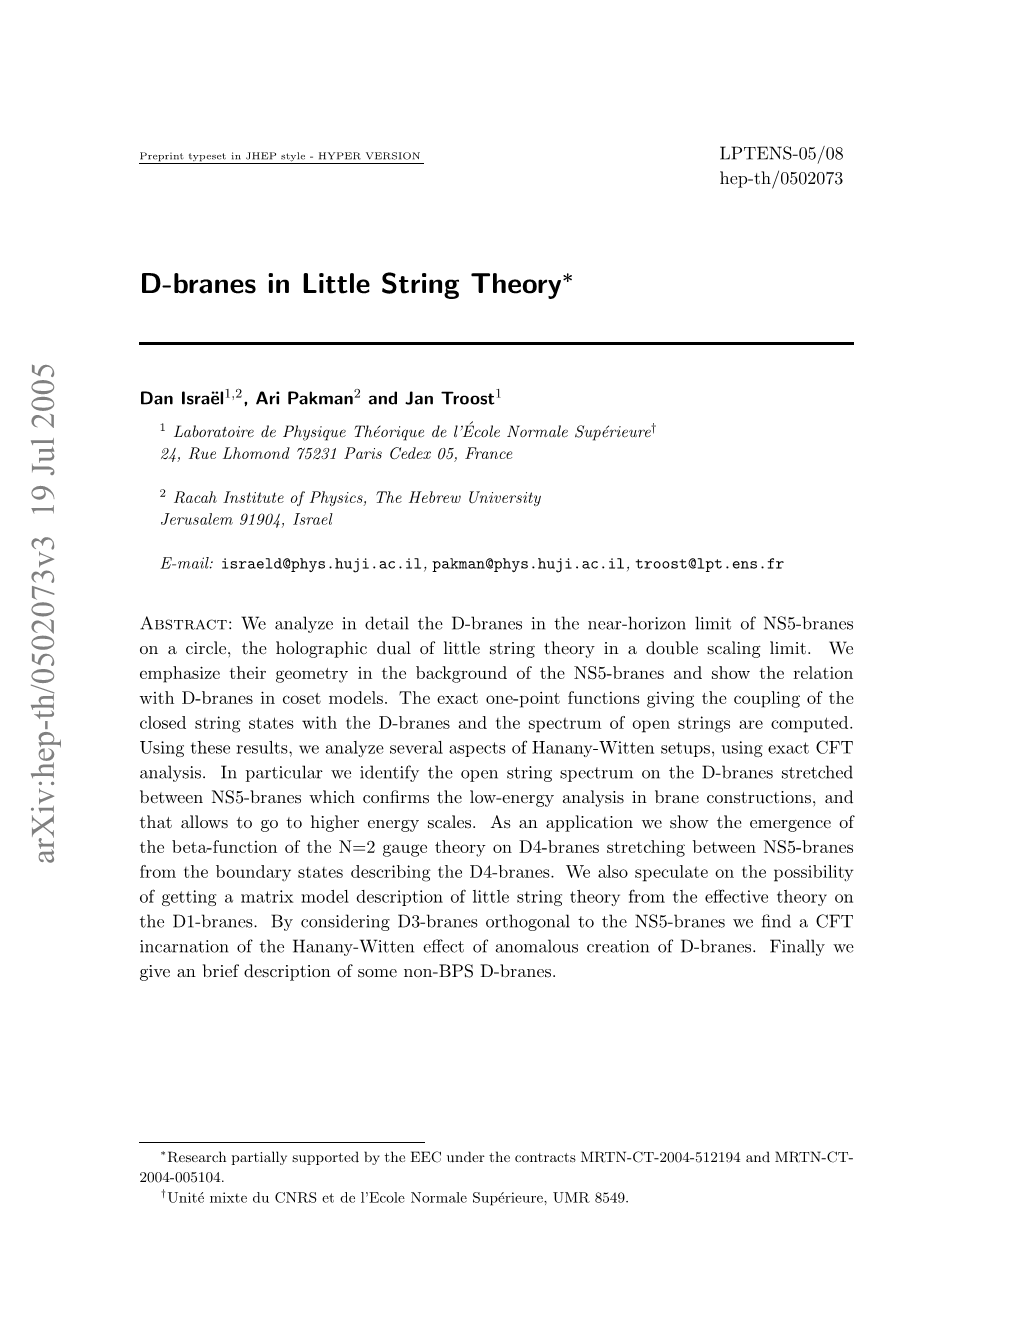 D-Branes in Little String Theory